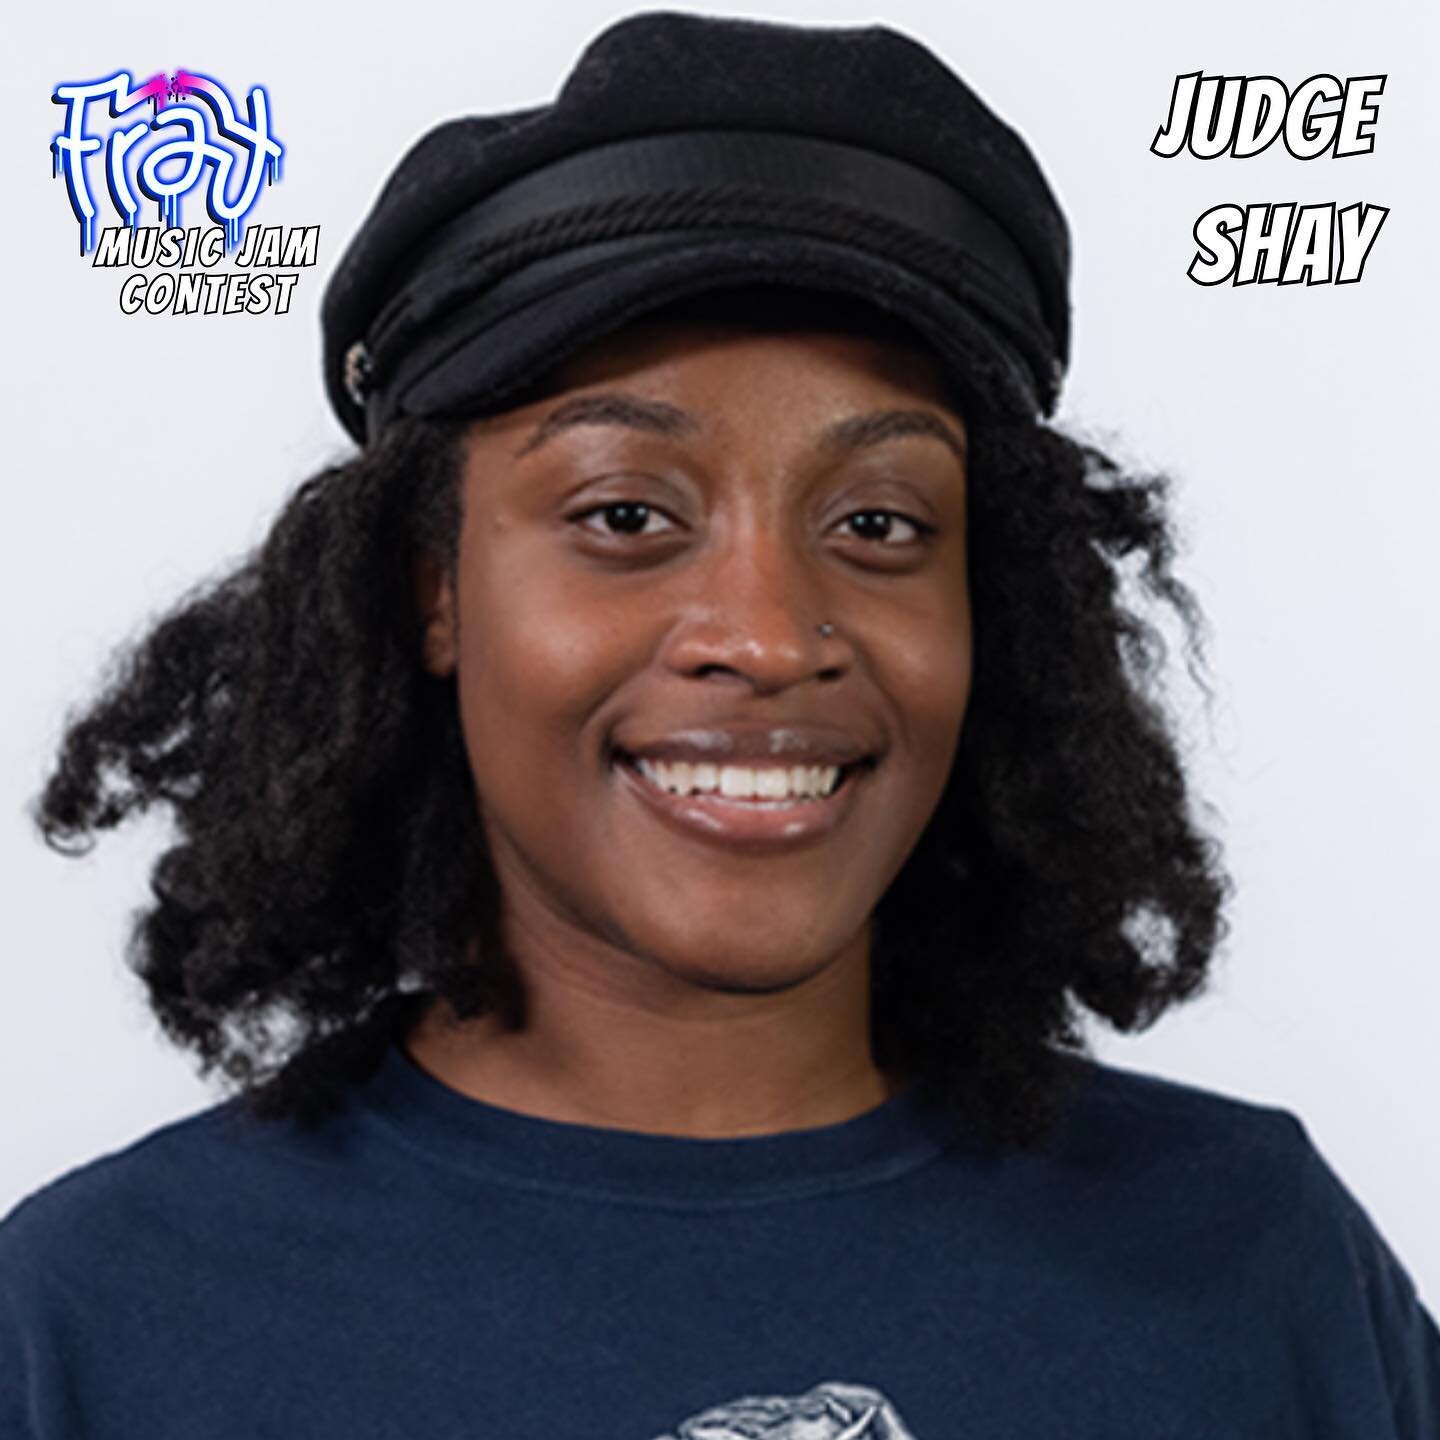 Last but not least, our amazing 3rd judge of the Fray Music Jam Contest - Shay Thompson 🌟

Shay Thompson is a presenter and journalist, working in games and entertainment. 

A well-respected member of the games industry, Shay has worked with:
🔸Baft